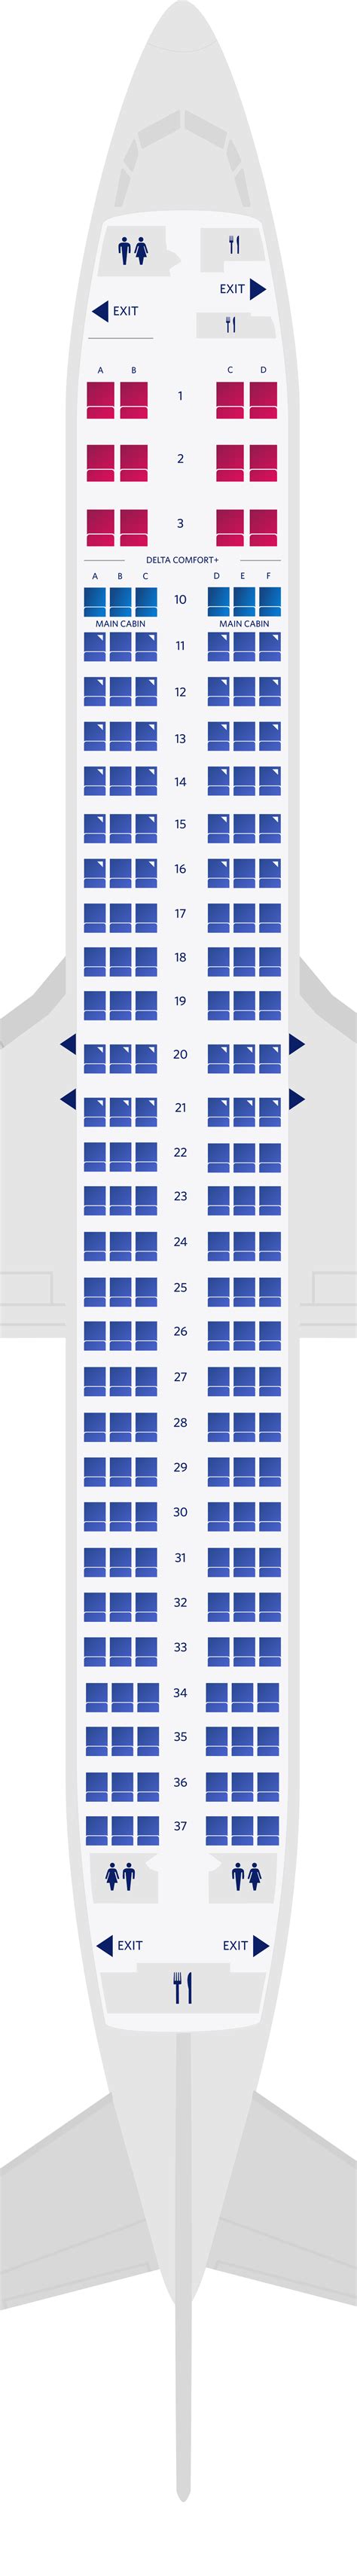 Delta 787-9 seat map. Seat map of the Boeing 787-9 (789) First 8 rows of seats offer 30 flat bed seats of business class that have 180 degrees recline. All these seats are standard. Only the seats 1A, 1K and 2DG have such a disadvantage as close location of the galleys and lavatory in front the noise from which may be bothersome. 